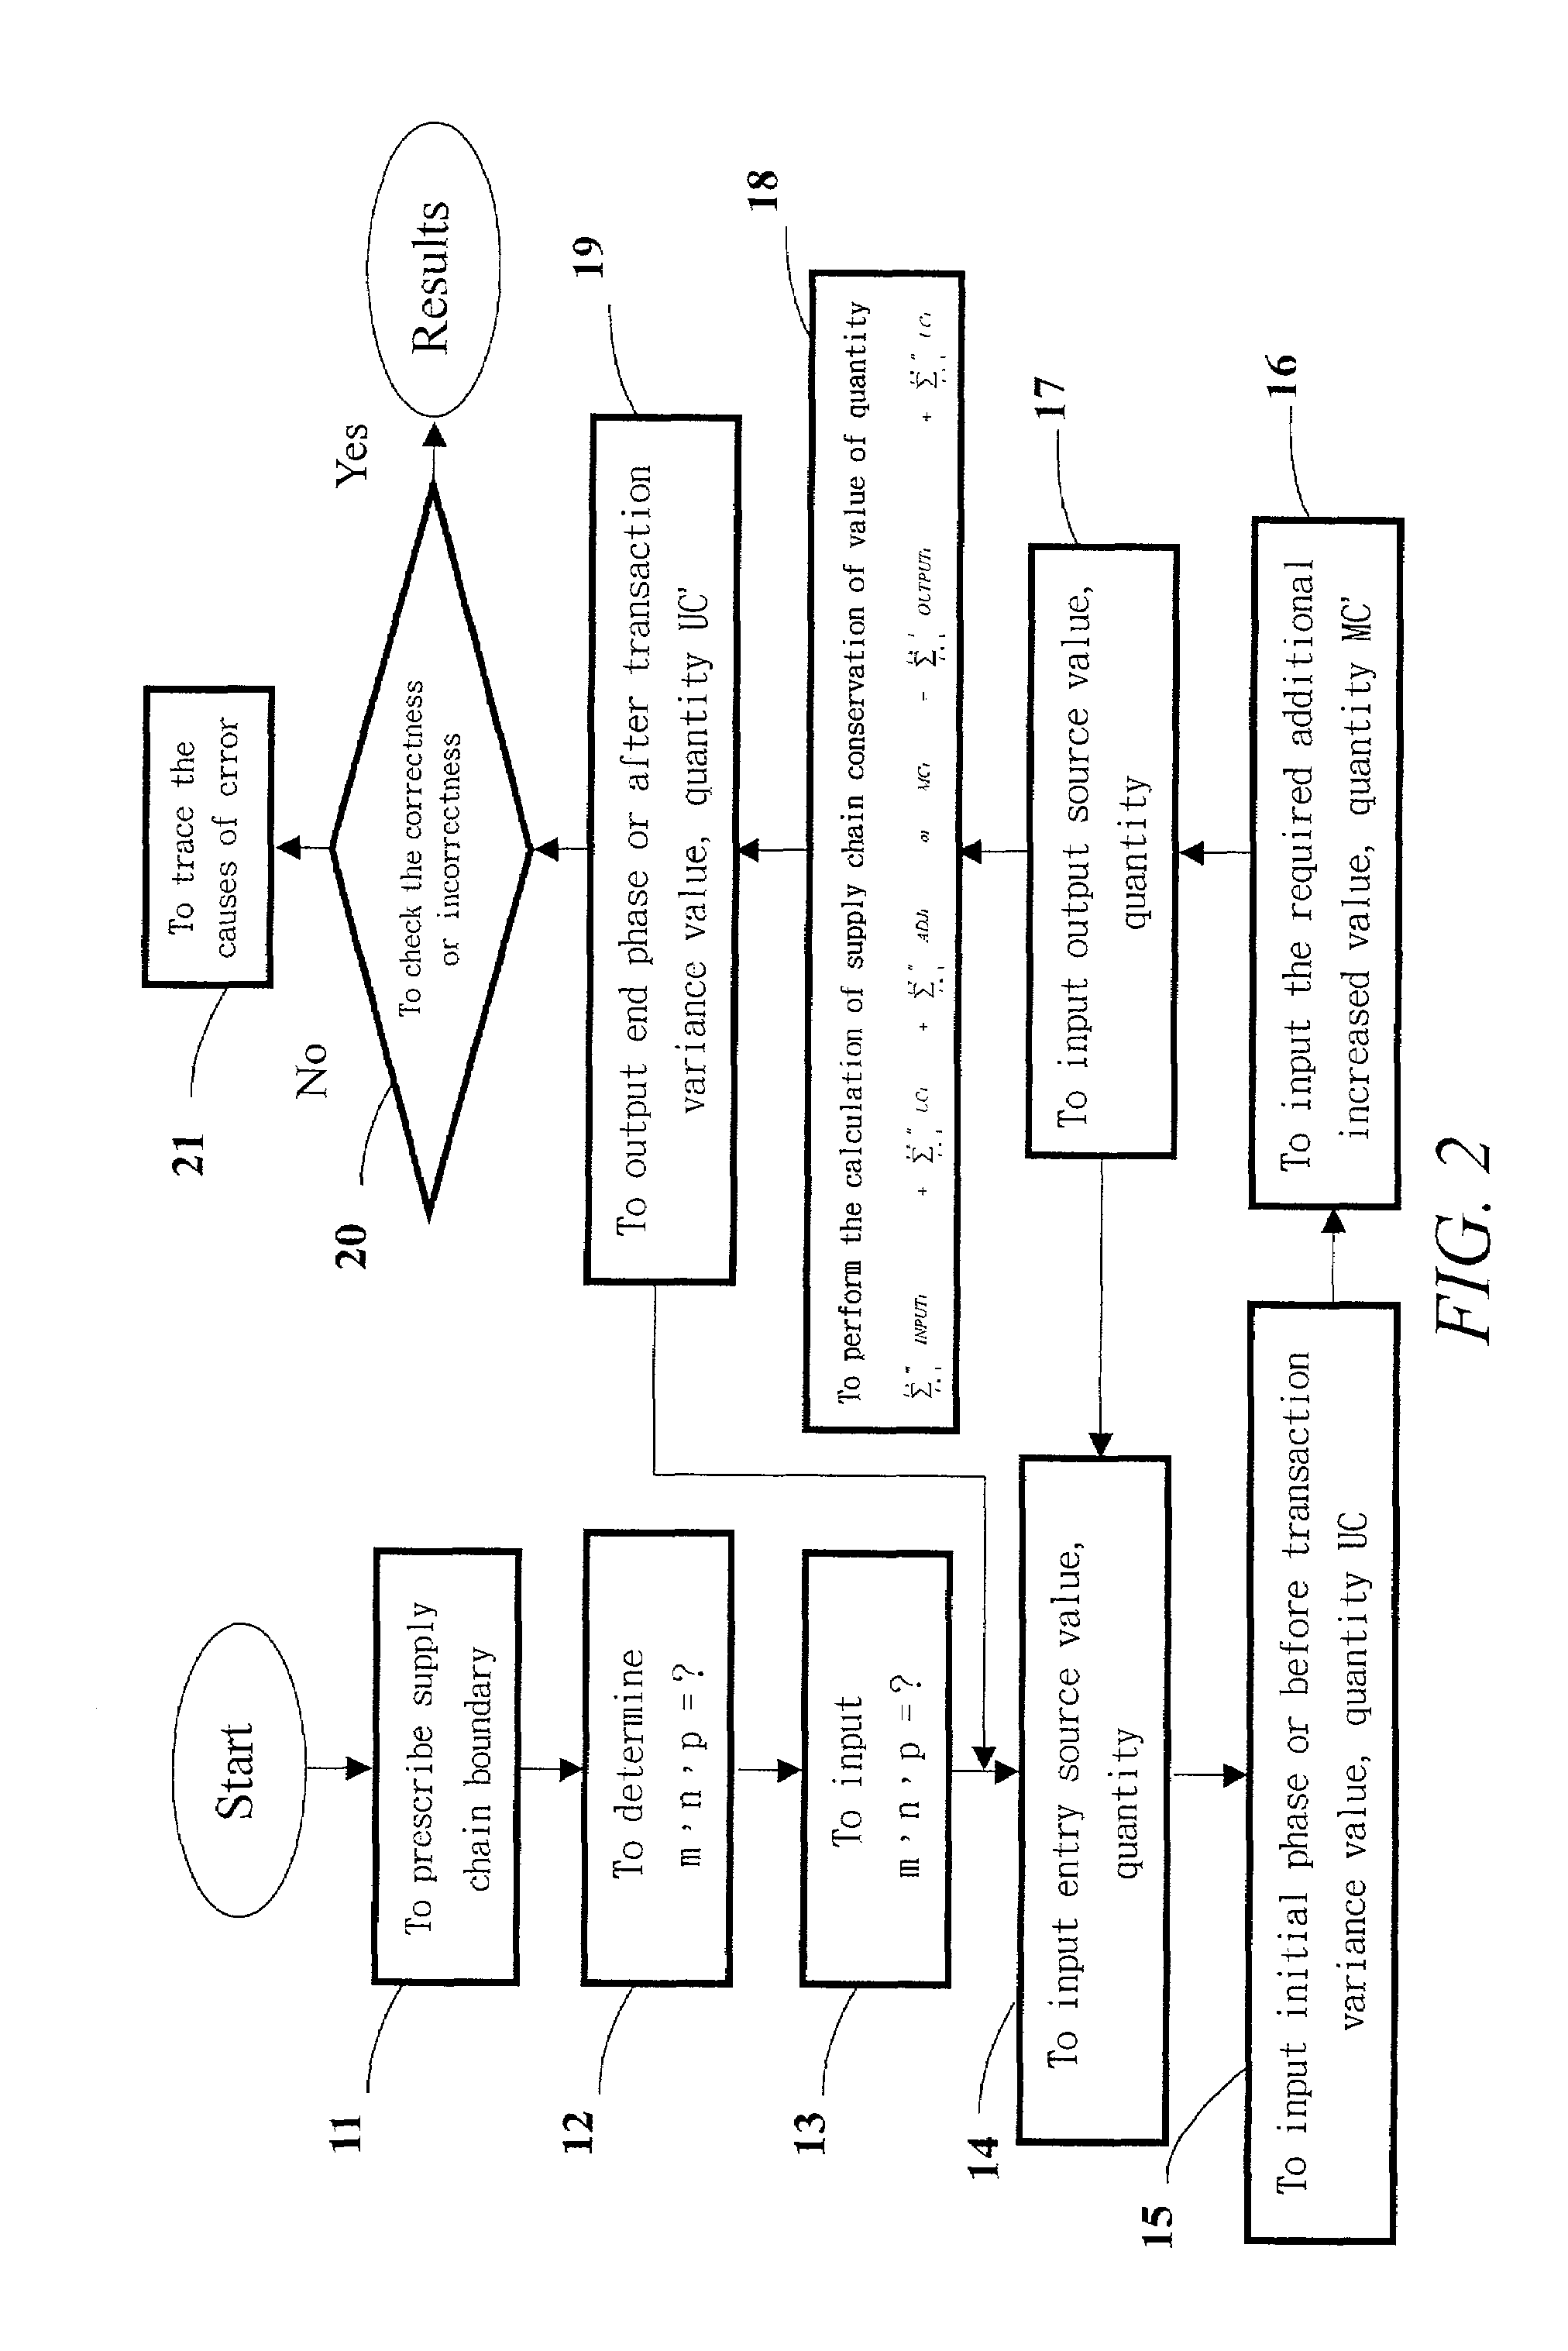 Application of supply chain unit cell or cell group or boundary conservation of value and quantity to computer management system